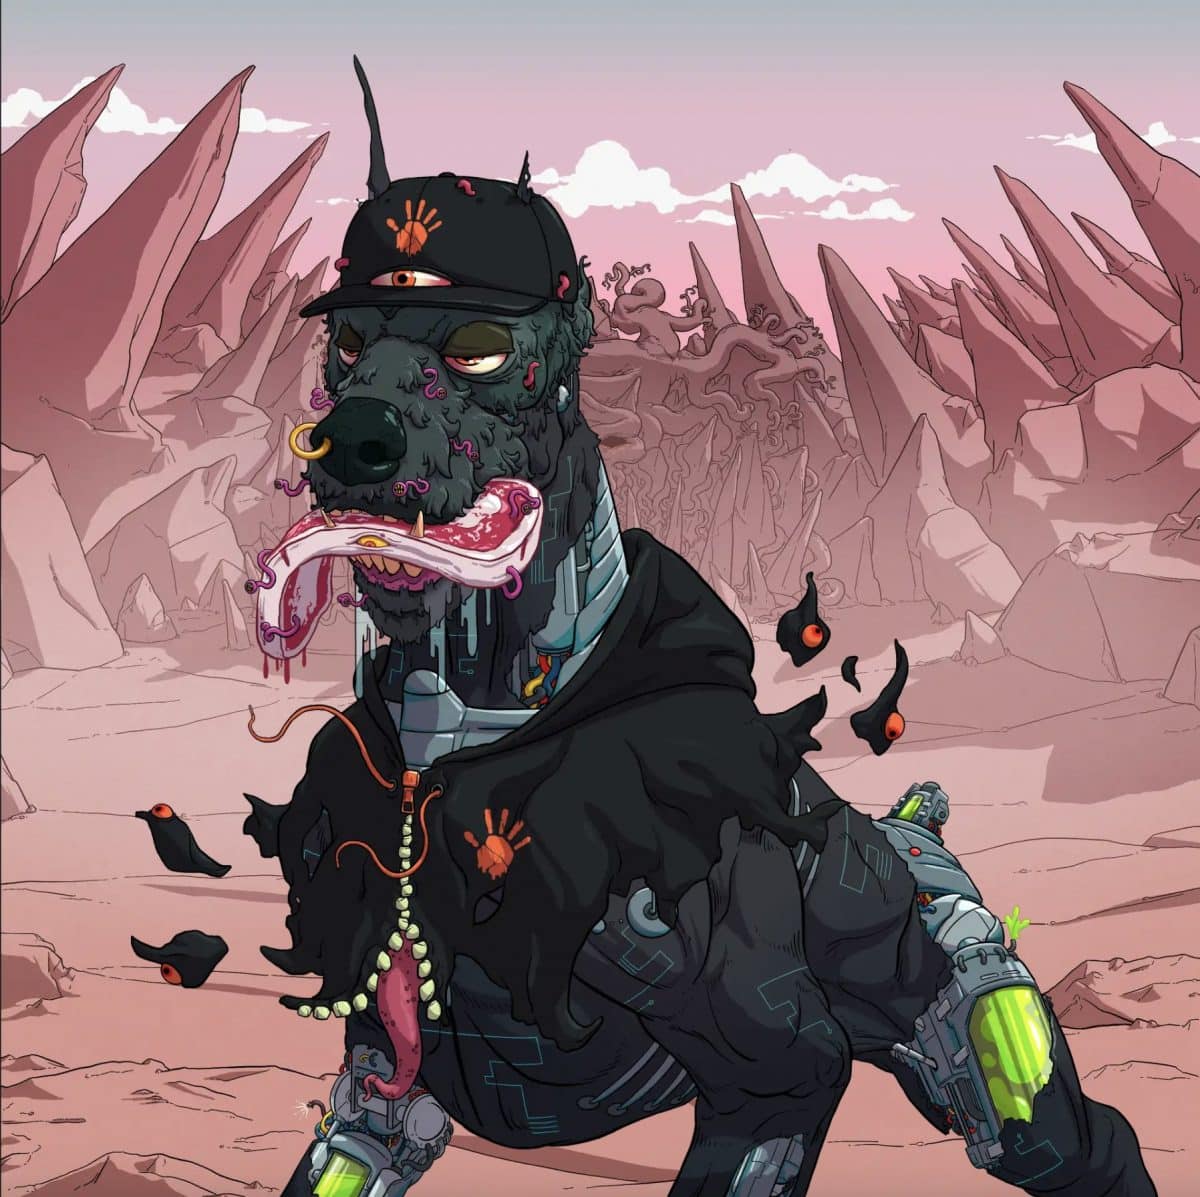 A cartoon mutant dog stands in a desert field with a slab of meat in its mouth.